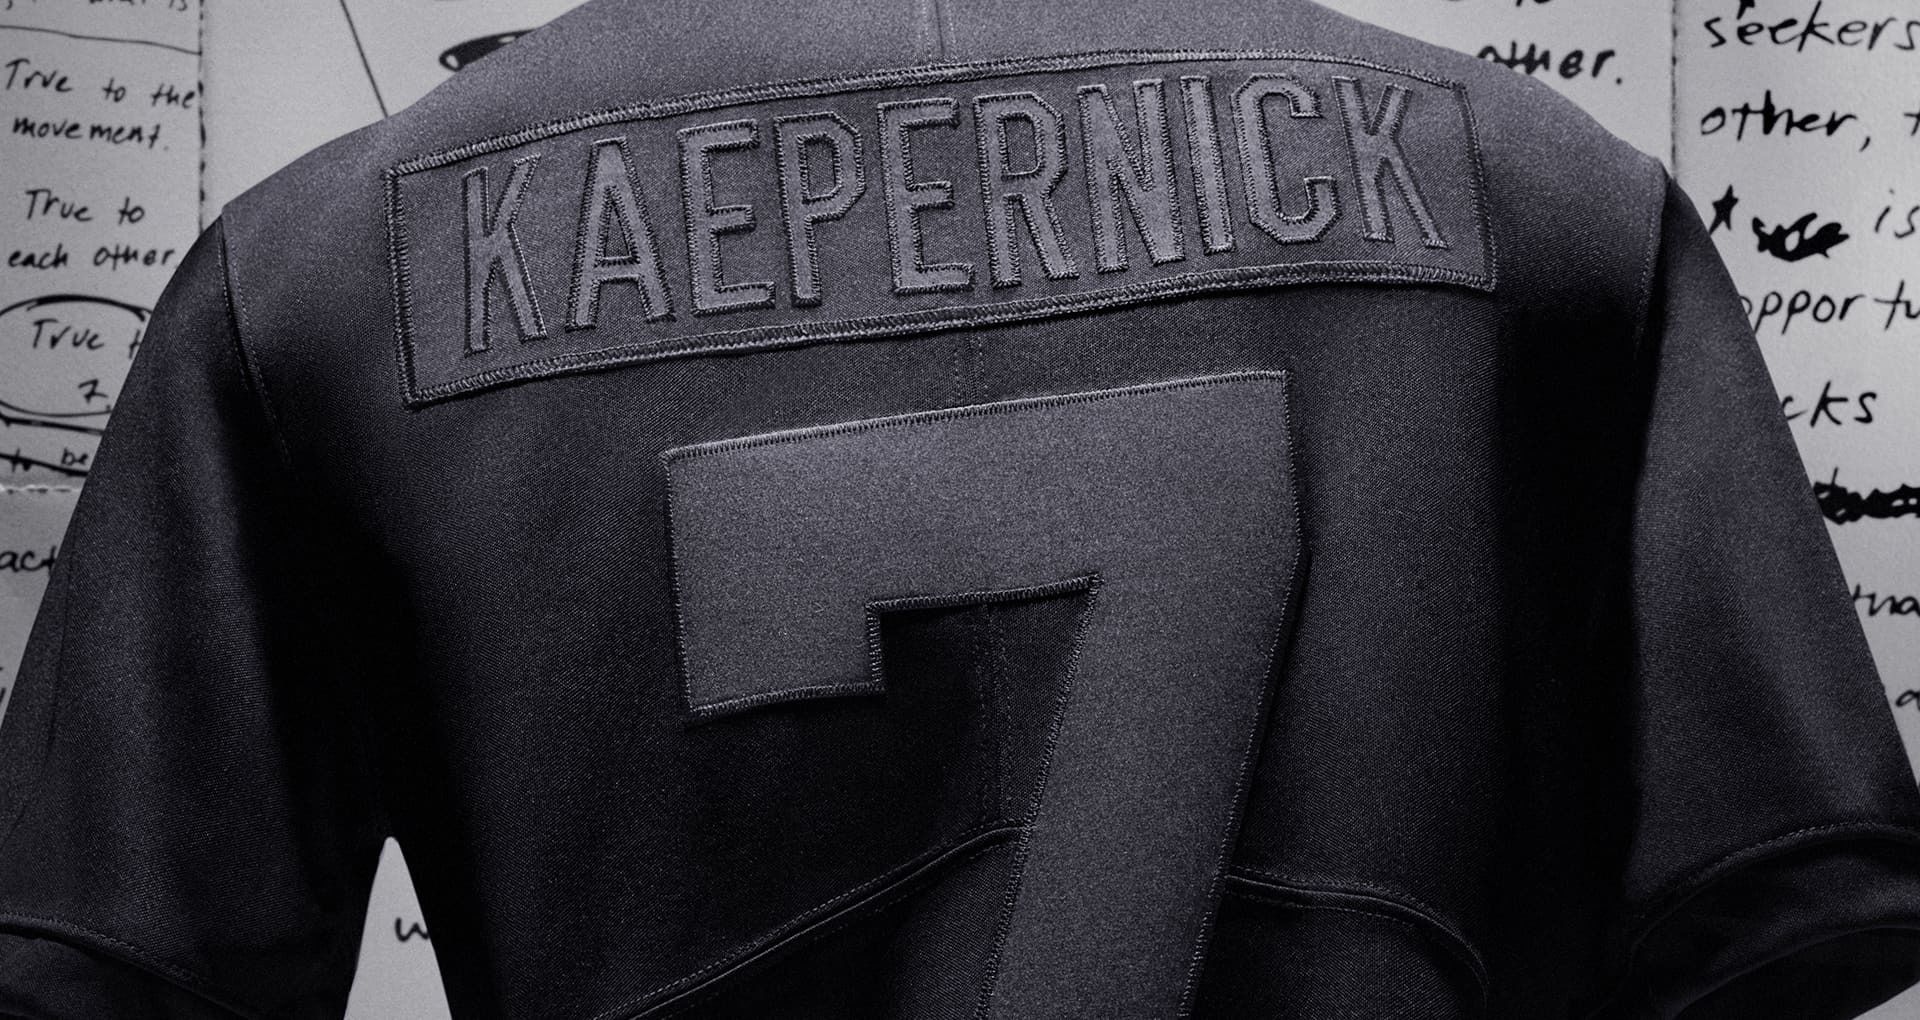 Nike's all-black Colin Kaepernick jersey marking 4 since he took a knee sells out in less than a minute | CNN